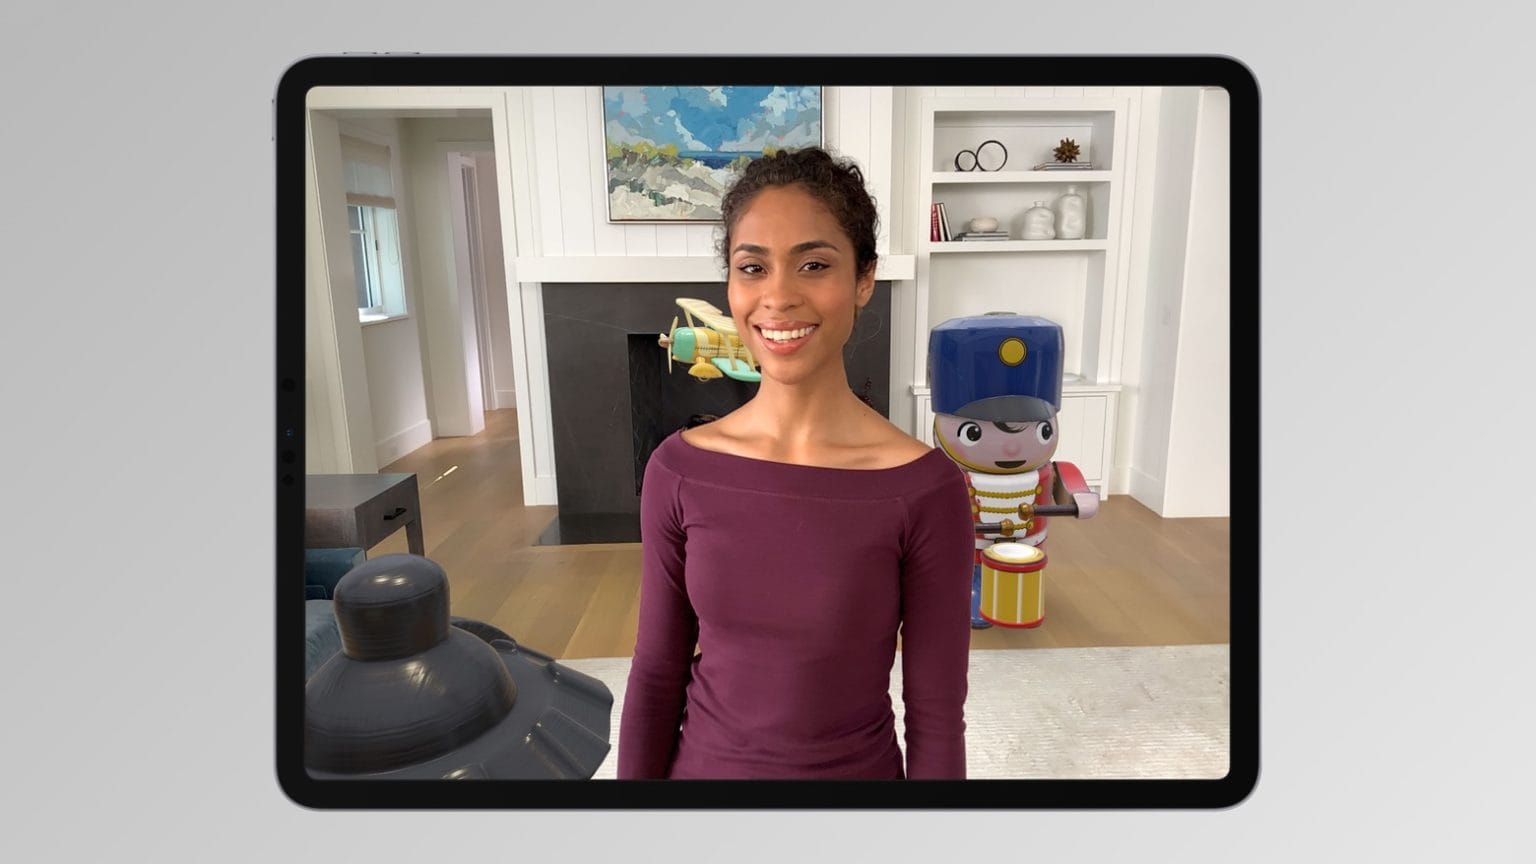 ARKit 3.5 offers improved people occlusion with its LiDAR 3D scanner.